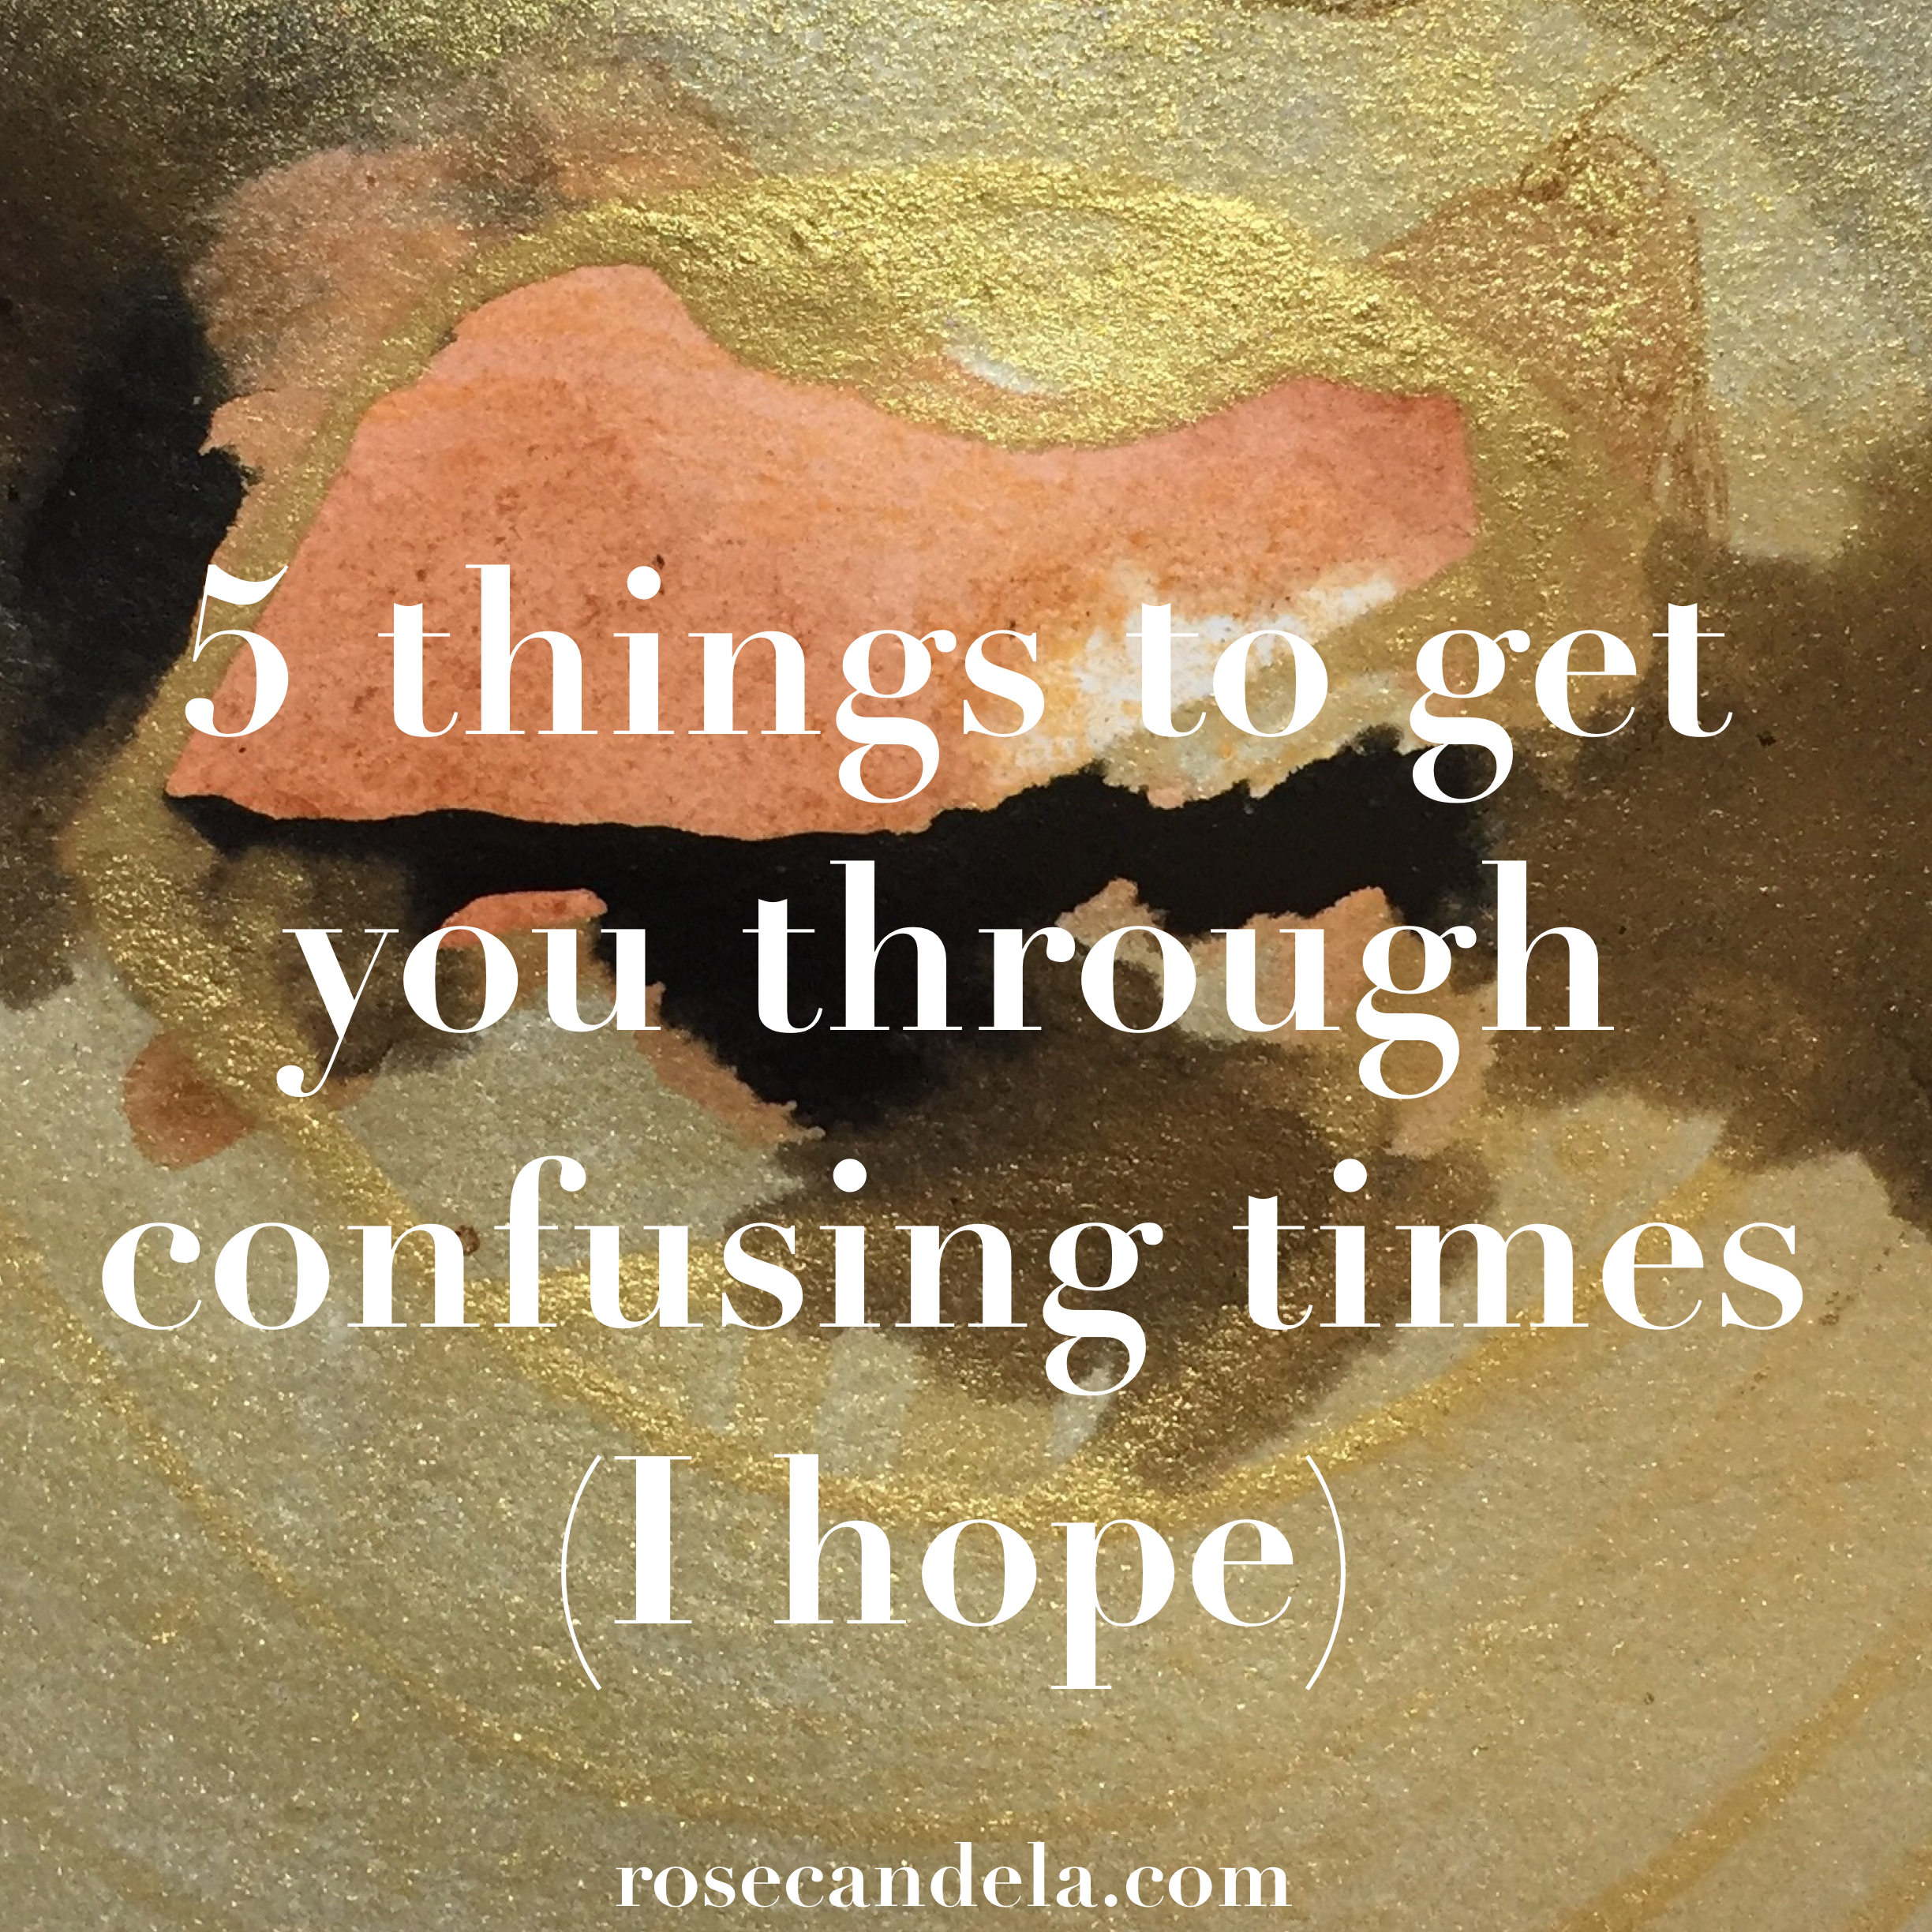 These 5 things will get you through confusing times (I hope)